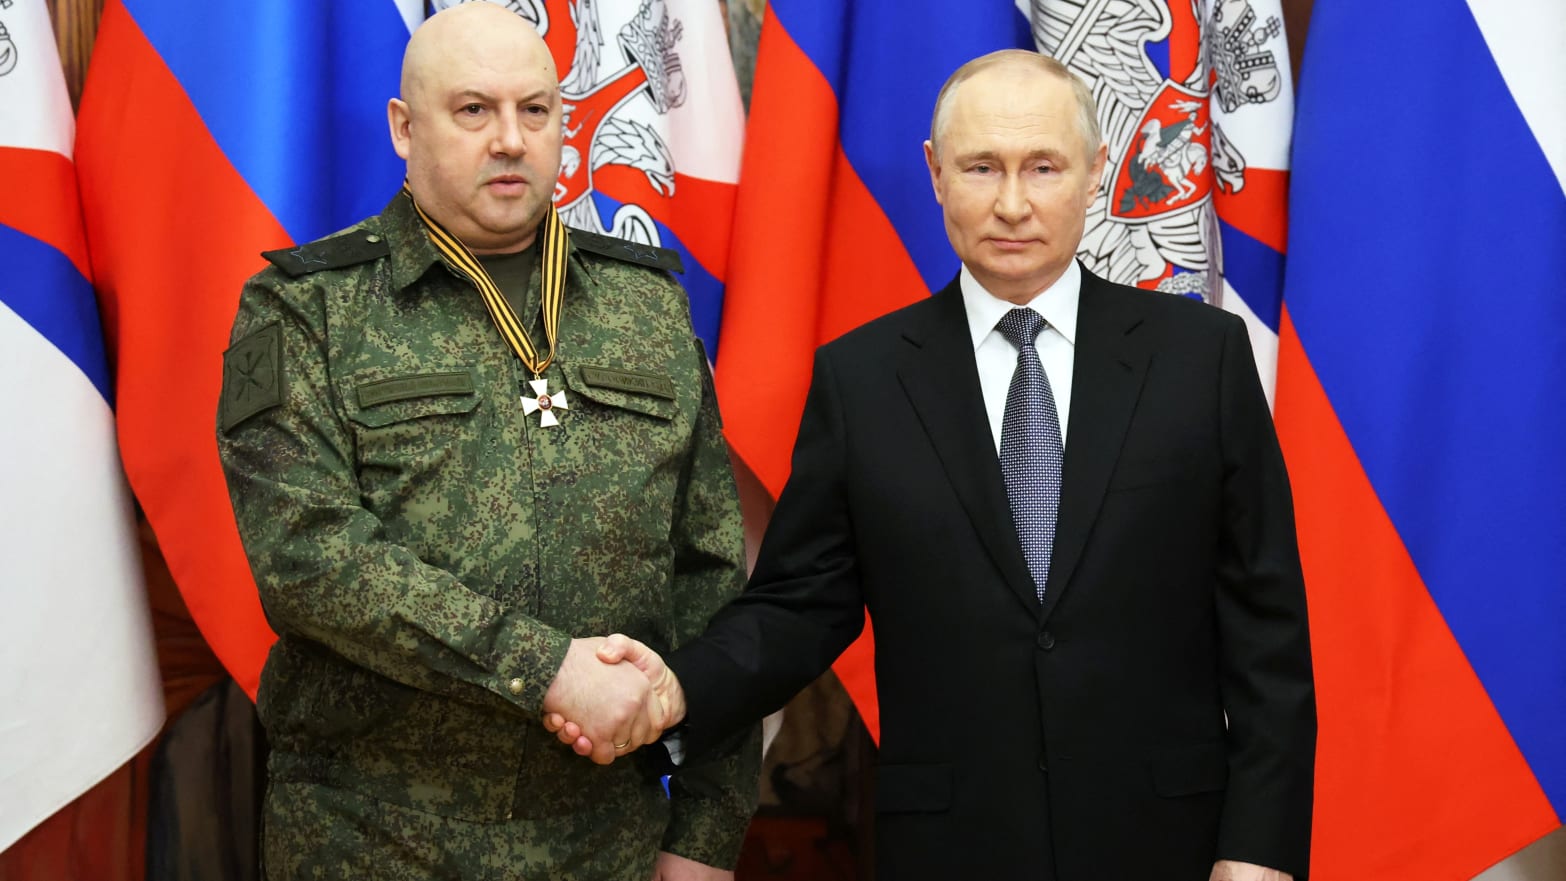 Russian President Vladimir Putin awards General Sergei Surovikin, commander of Russian forces in Ukraine, with the Order of St. George, Third Class, at the headquarters of the Southern Military District in Rostov-on-Don, Russia, Dec. 31, 2022. 